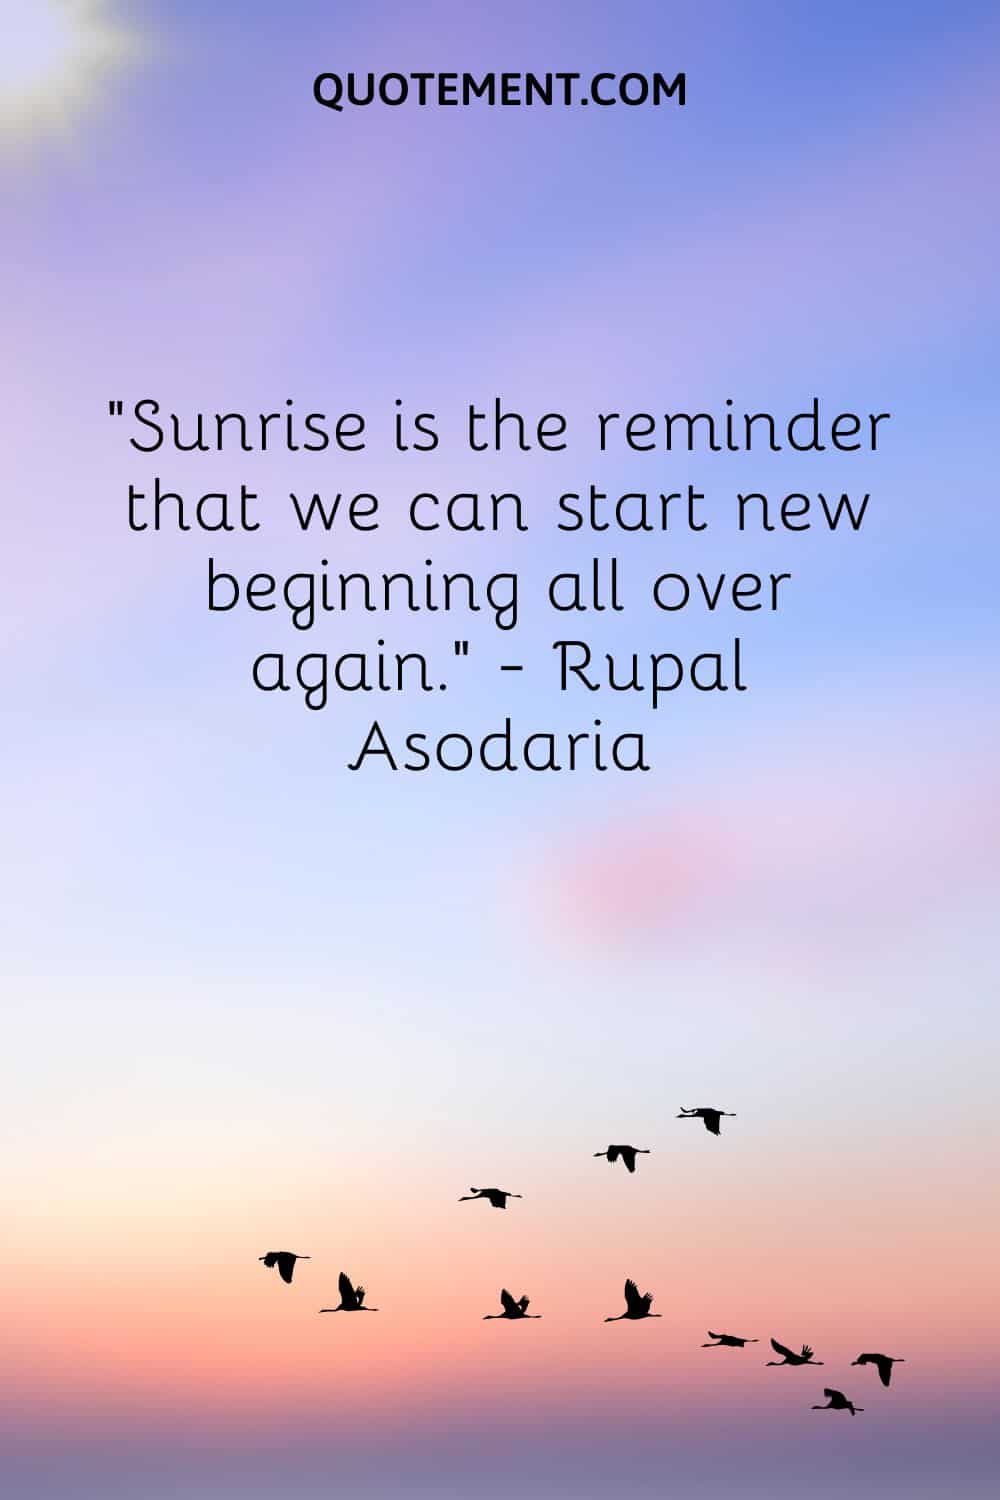 Sunrise is the reminder that we can start new beginning all over again